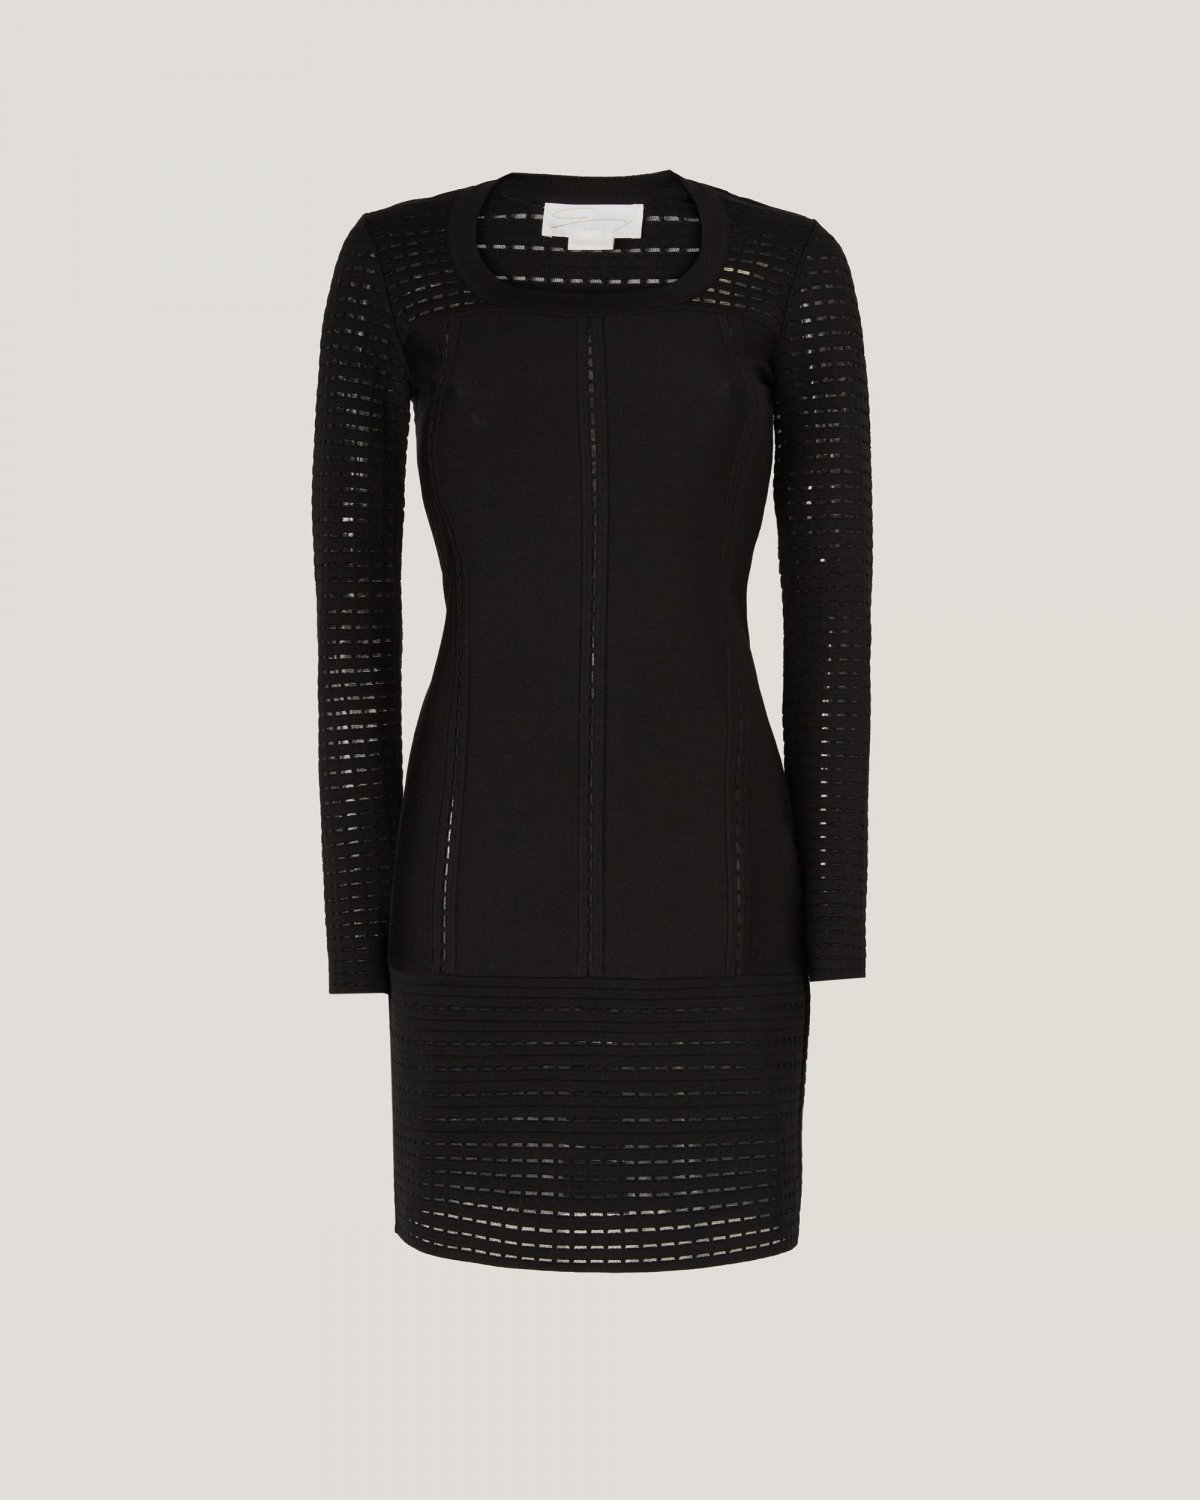 Sheath dress with iconic embroideries | 73_74, Iconic Capsule Collection, Cold weather wear | Genny